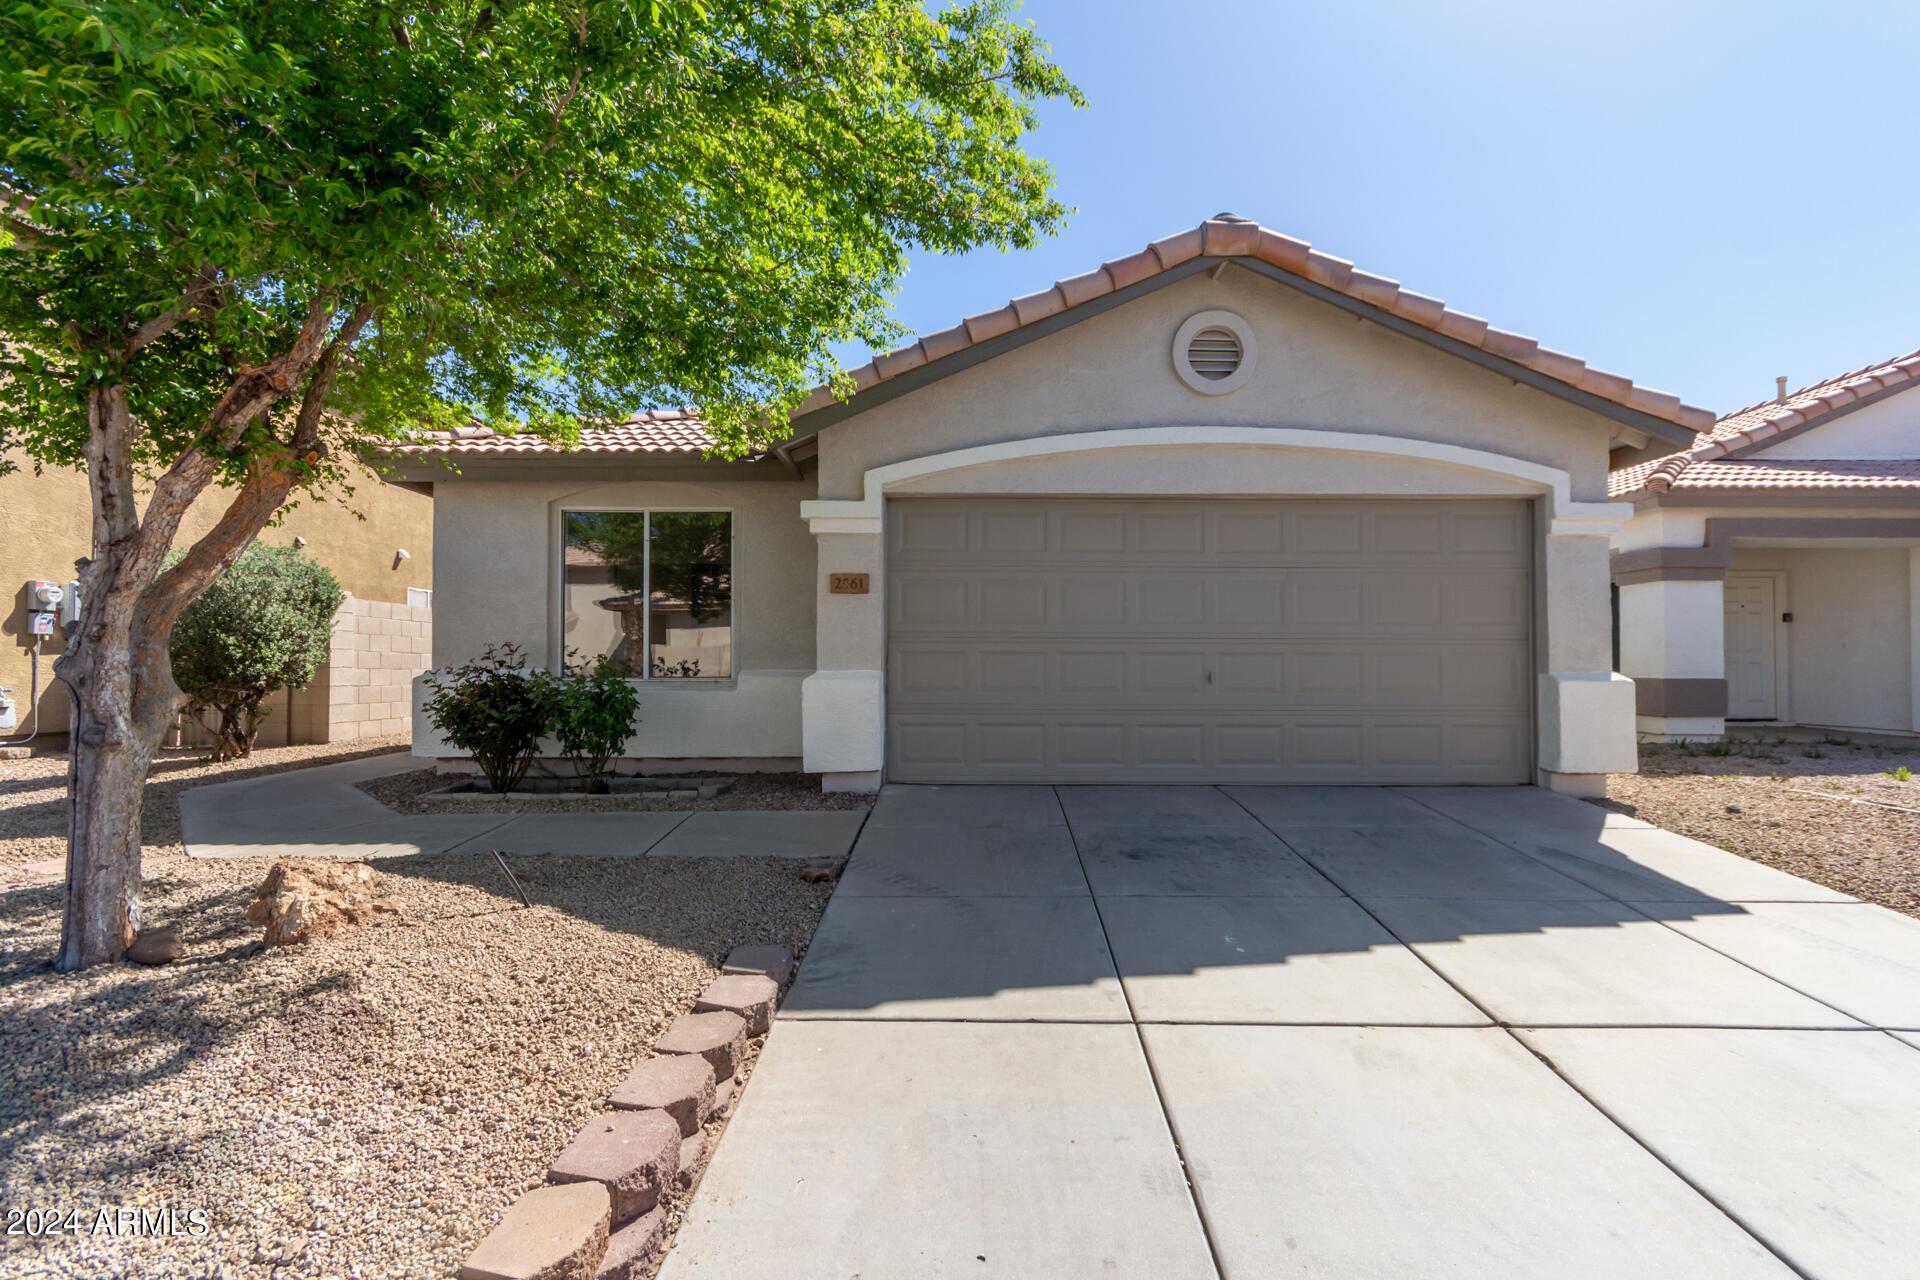 Photo one of 2561 S 156Th Ave Goodyear AZ 85338 | MLS 6684948